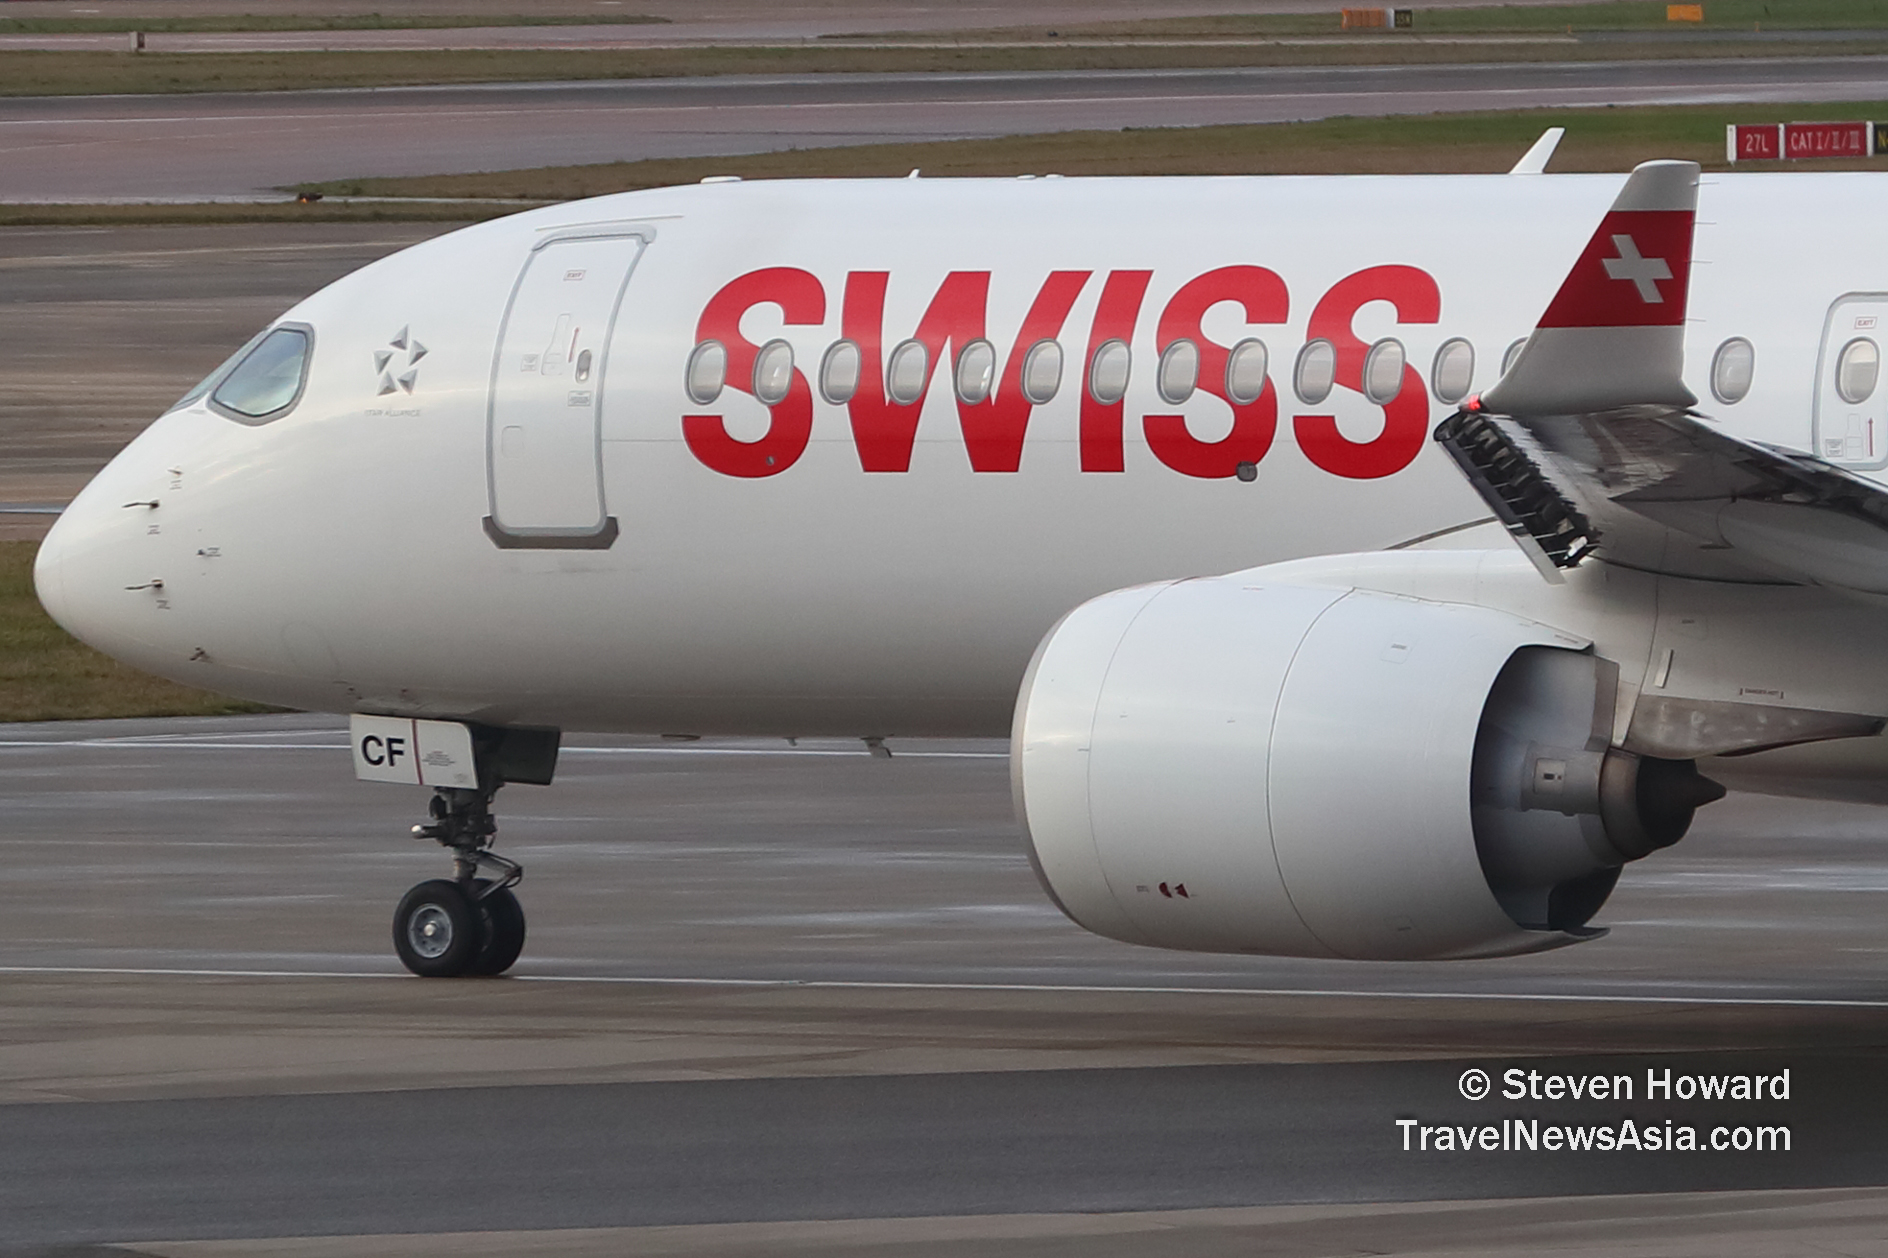 Swiss A220-300 reg: HB-JCF. Picture by Steven Howard of TravelNewsAsia.com Click to enlarge.